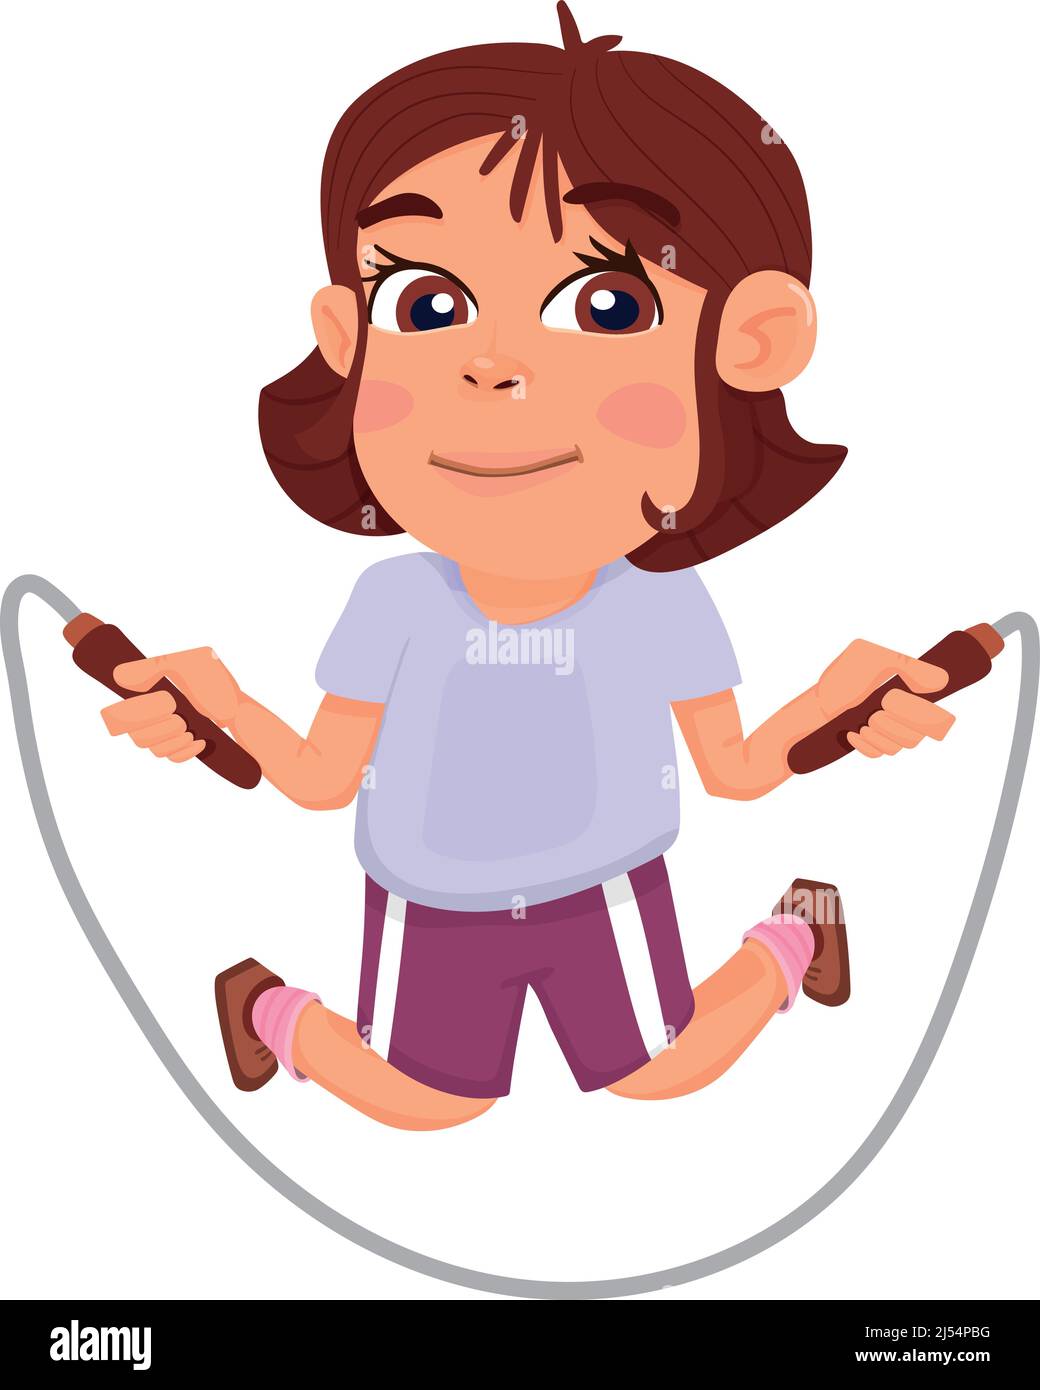 Girl jumping on skipping rope. Cartoon kid exercise Stock Vector